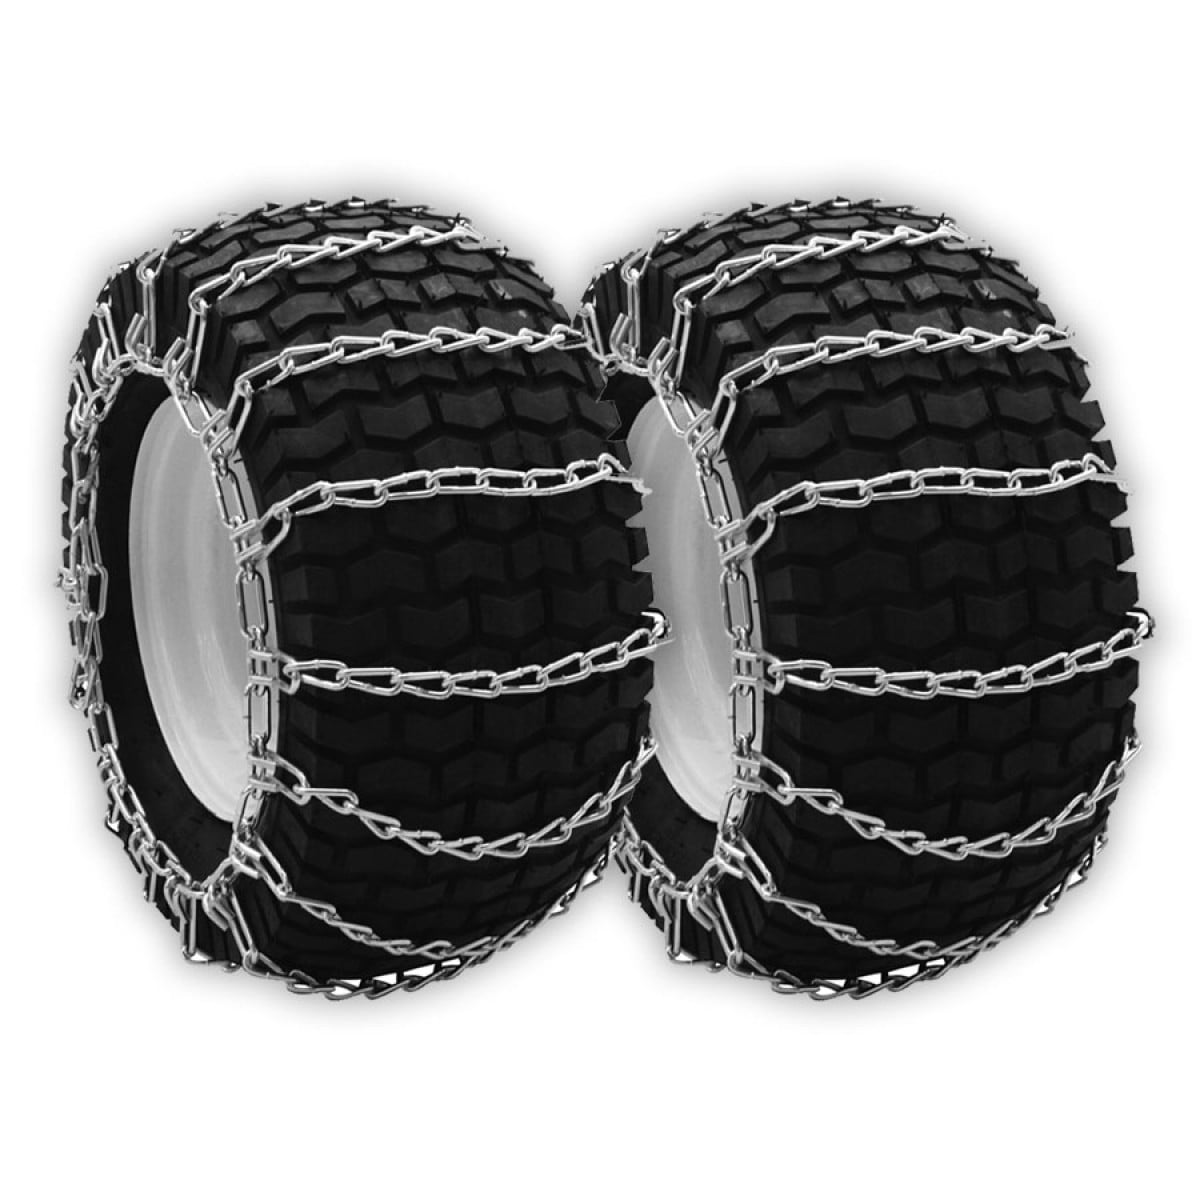  OakTen Set of 2 13x4.1 13x5x6 13x5x7 Tire Chains for Lawn  Garden Tractors Mowers and Rider, 2-Link Lawn Tractors Tire Chains :  Automotive